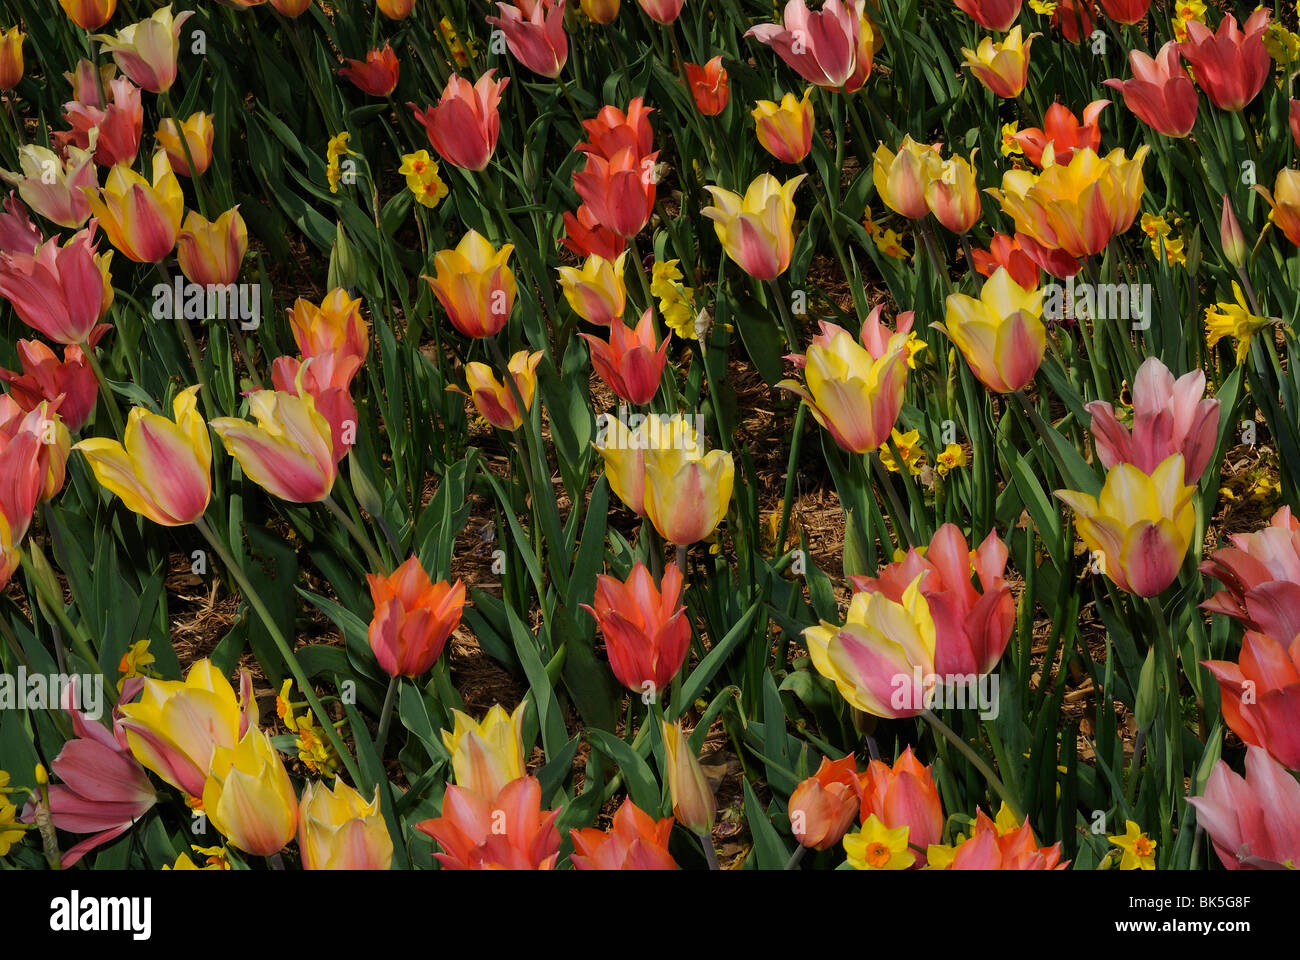 Flower bed of tulips in the Dallas Arboretum Park, Texas Stock Photo